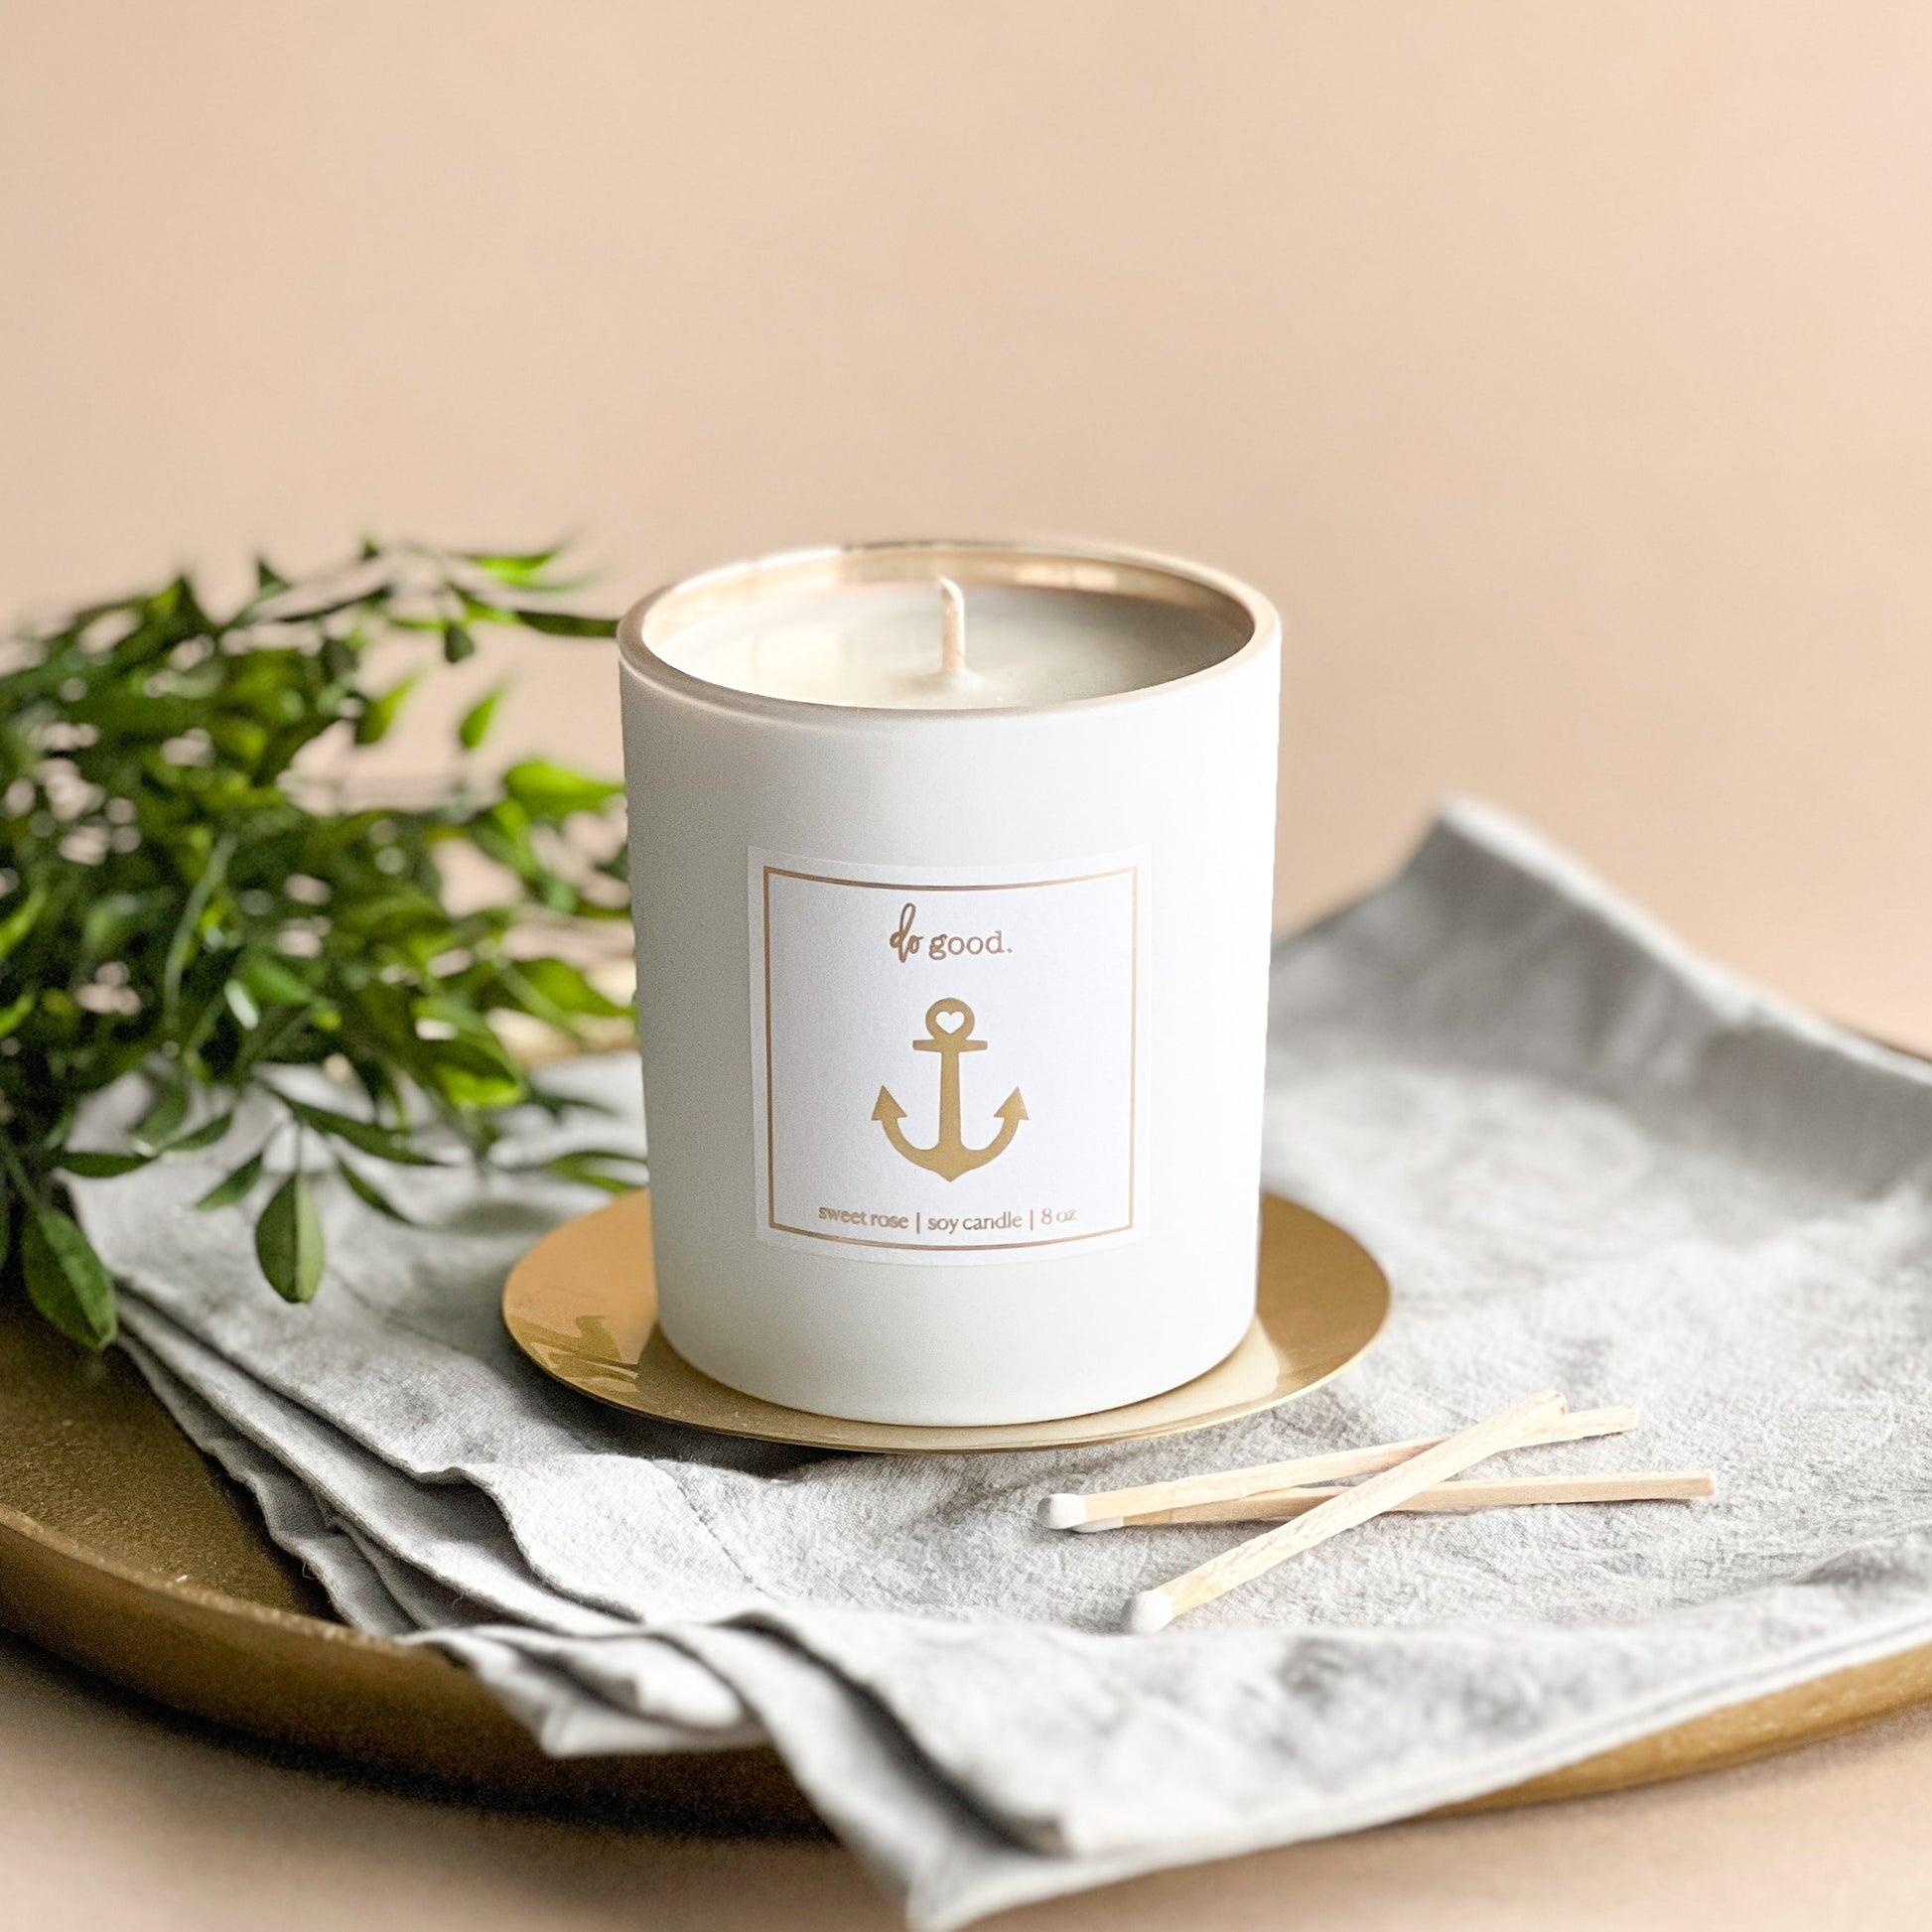 matte white candle vessel filled with soy wax and scented with "sweet rose".  label is linen white with a gold embossed anchor